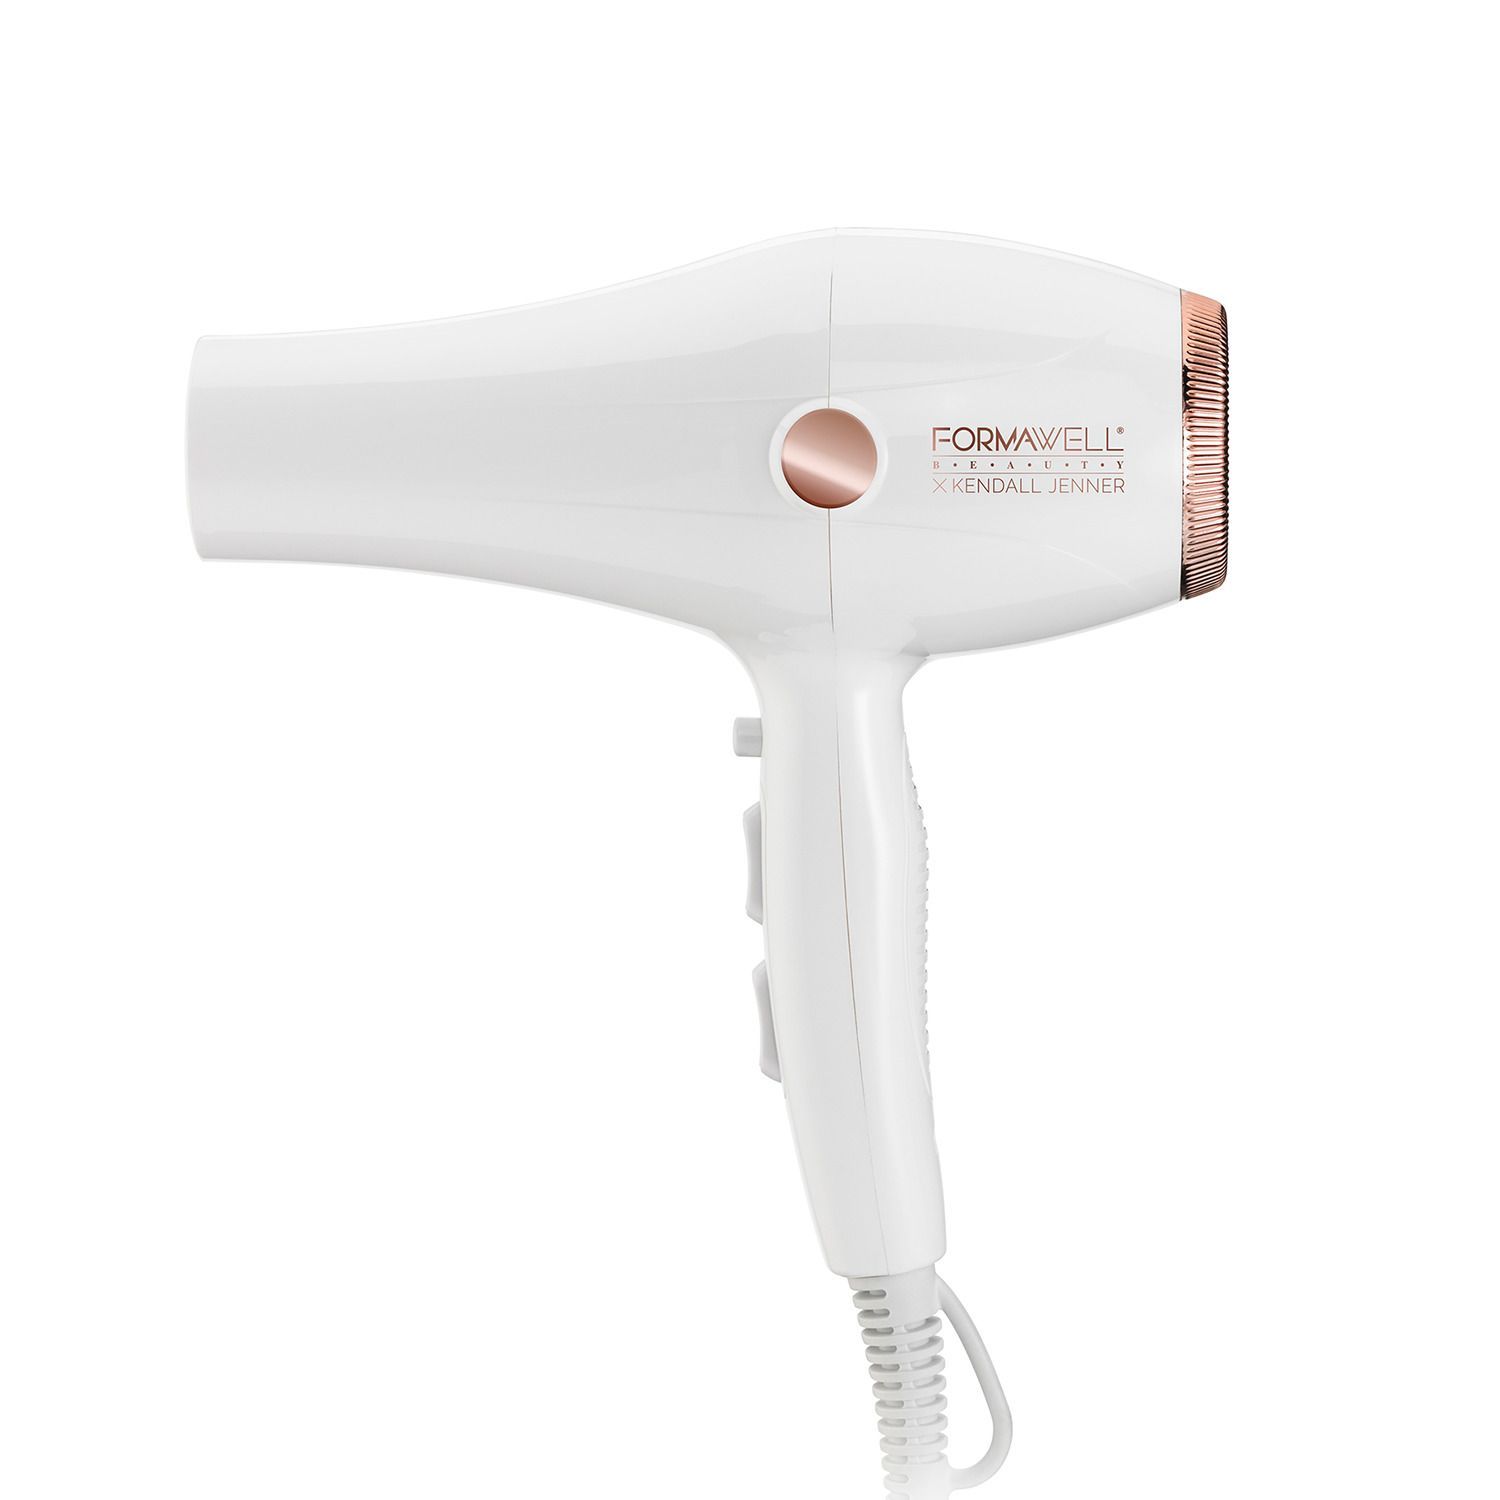 10 Best Hair Styling Tools and Appliances of 2022